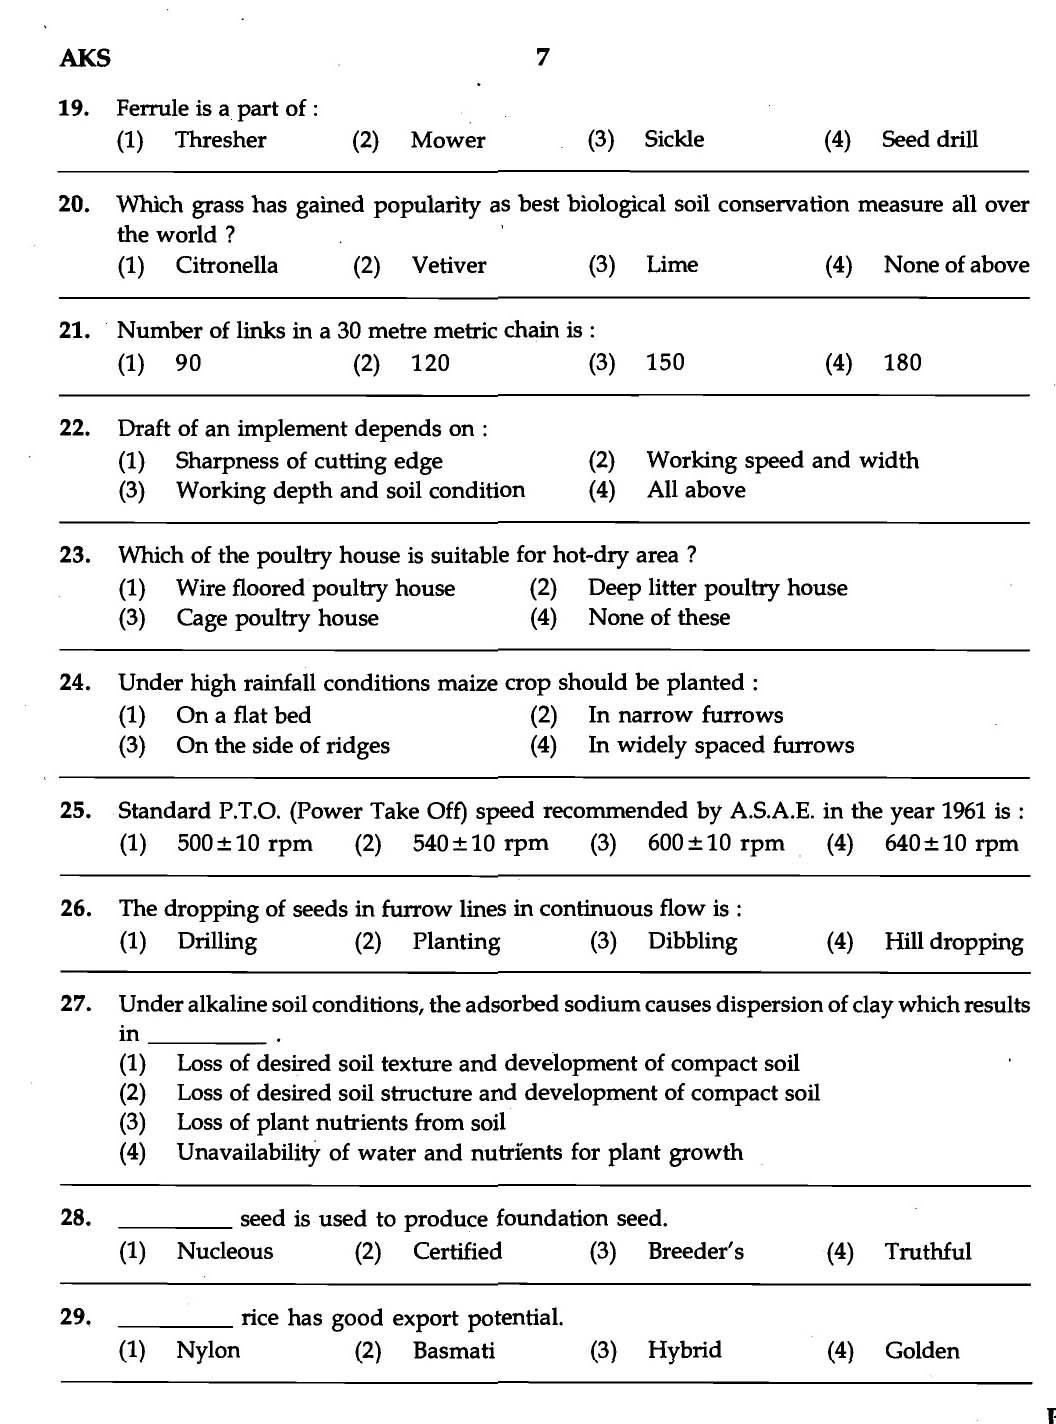 MPSC Agricultural Services Exam 2007 Question Paper Agricultural Science 5